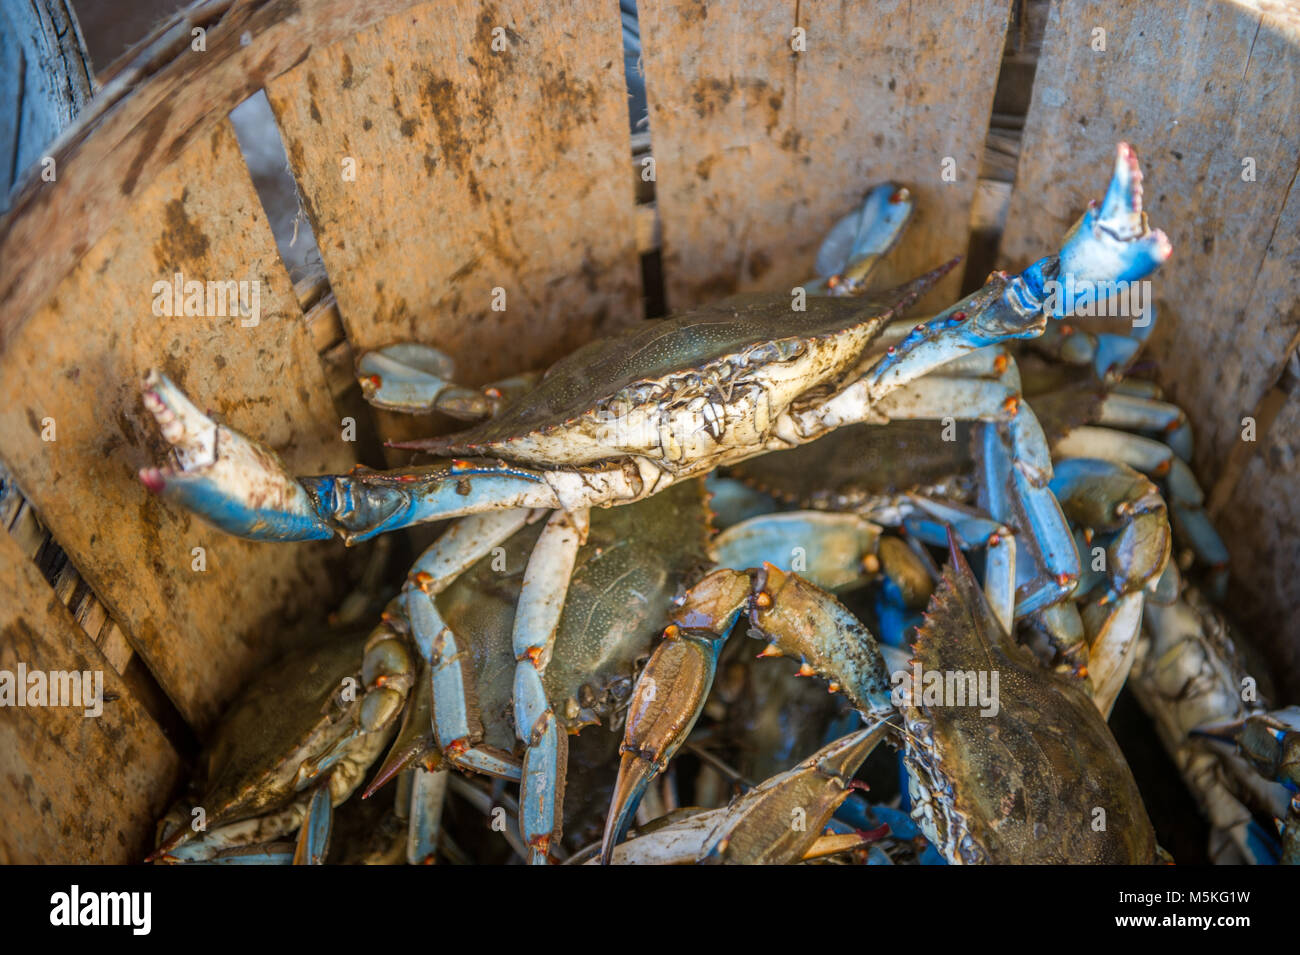 Chesapeake blue crab lifts up its claws standing in basket, Dundalk, Maryland. Stock Photo